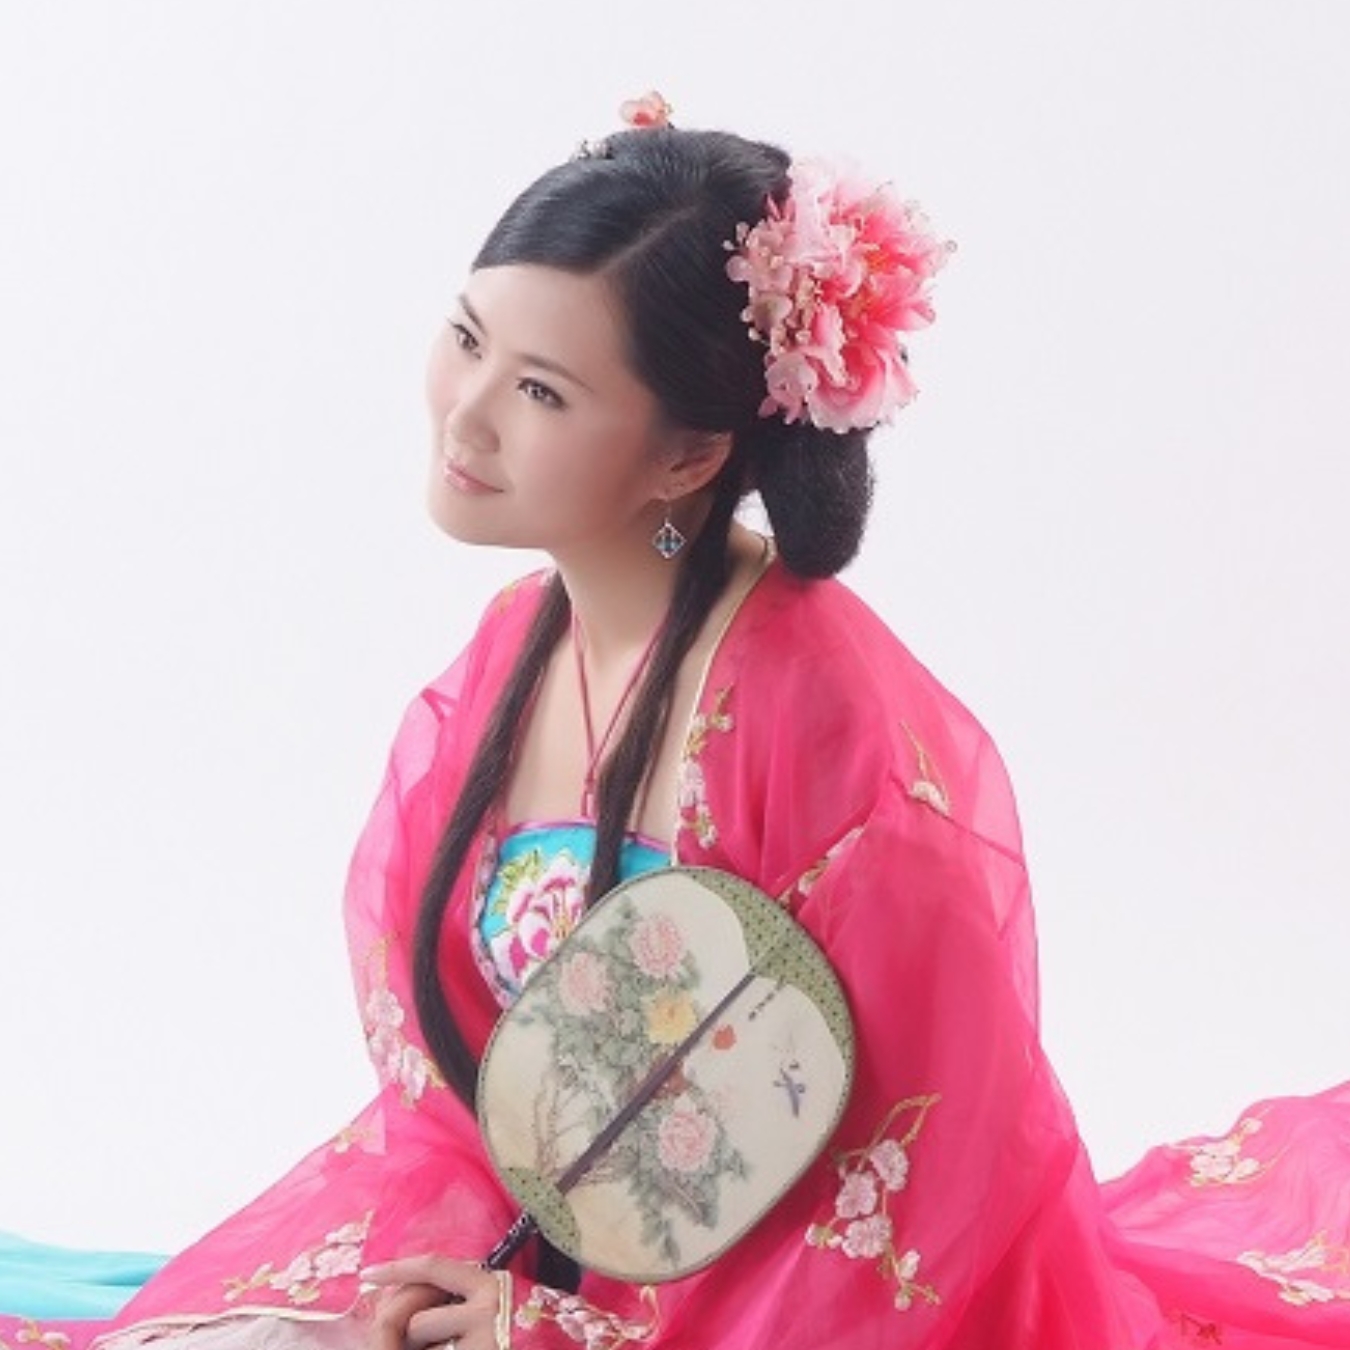 Headshot of a person with light skin tone with long black hair wearing traditional Chinese garments.